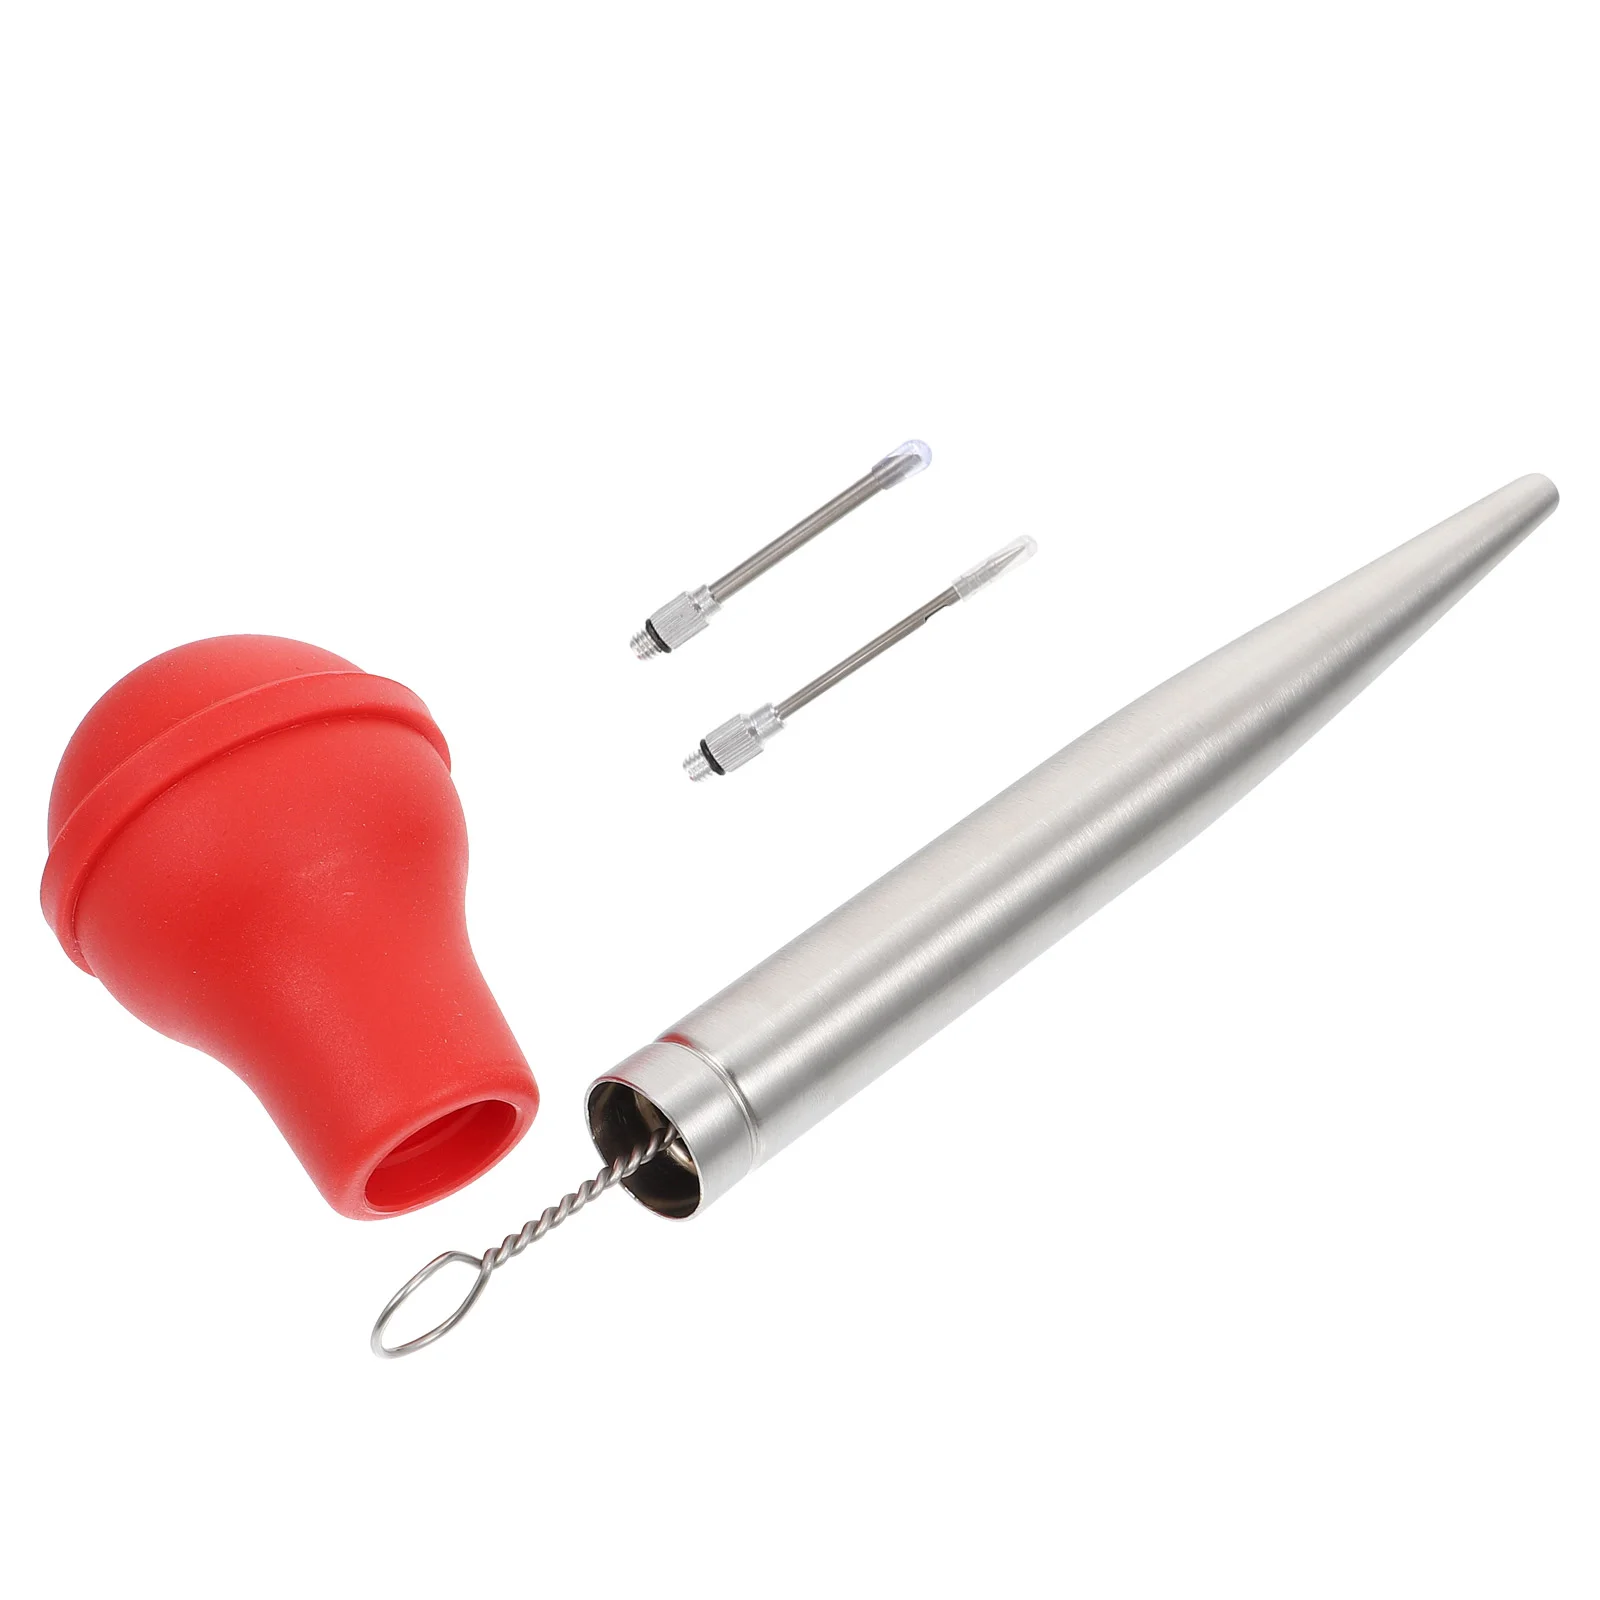 

Injector Turkey Meat Injection Syringe Baster Seasoning Sauce Bbq Marinade Cooking Tube Oil Barbecue Kitsteel Stainless